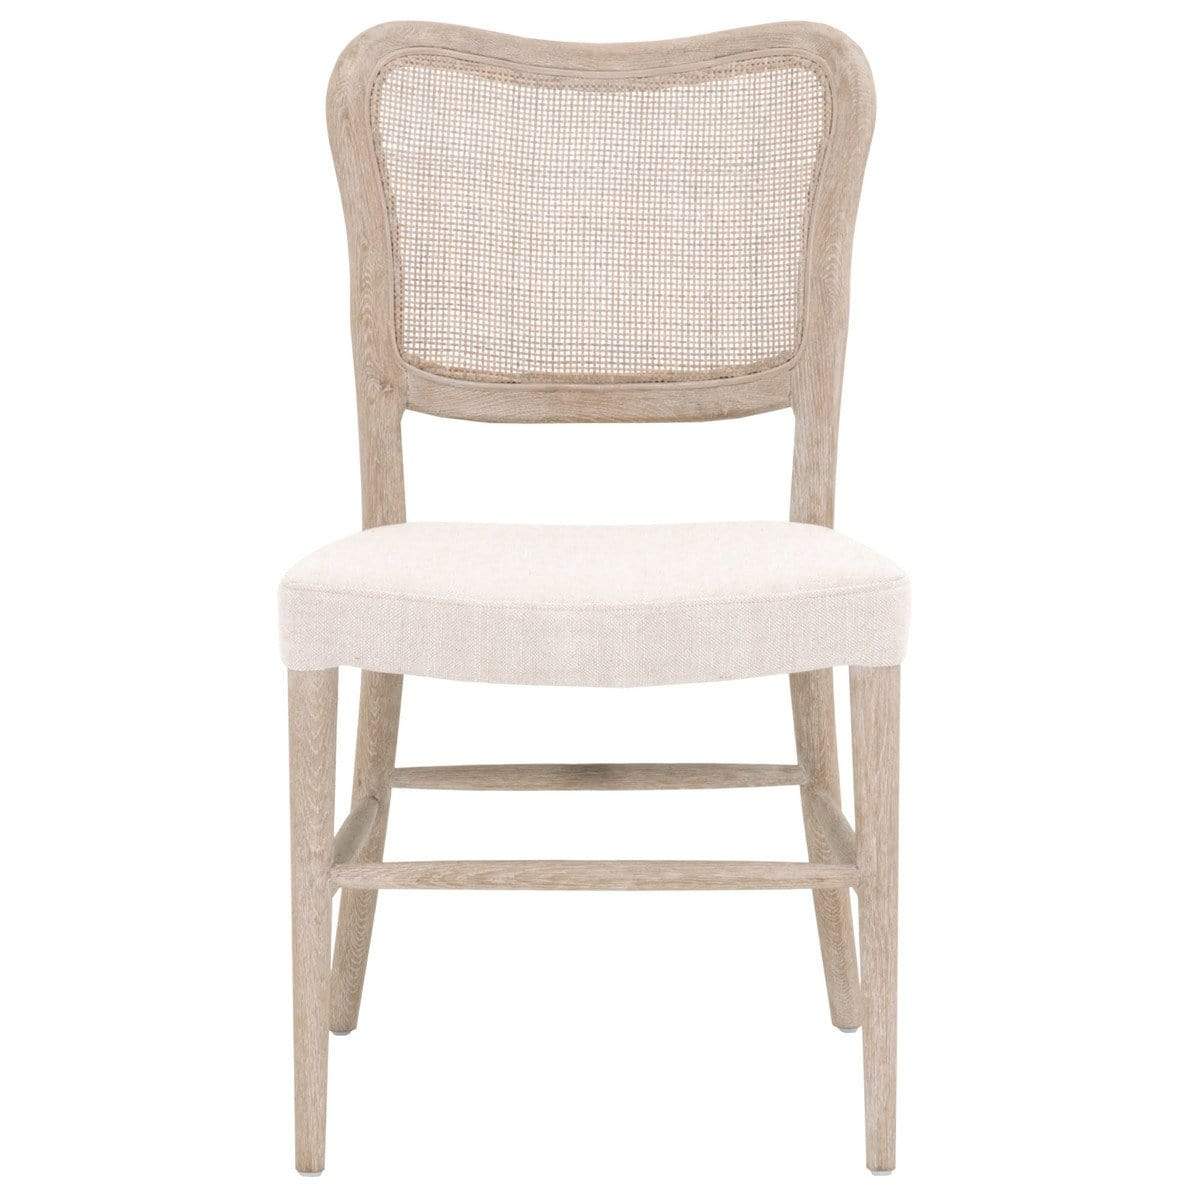 Candelabra Home Cela Dining Chair (Set of 2) Furniture orient-express-6661.BISQ/NG